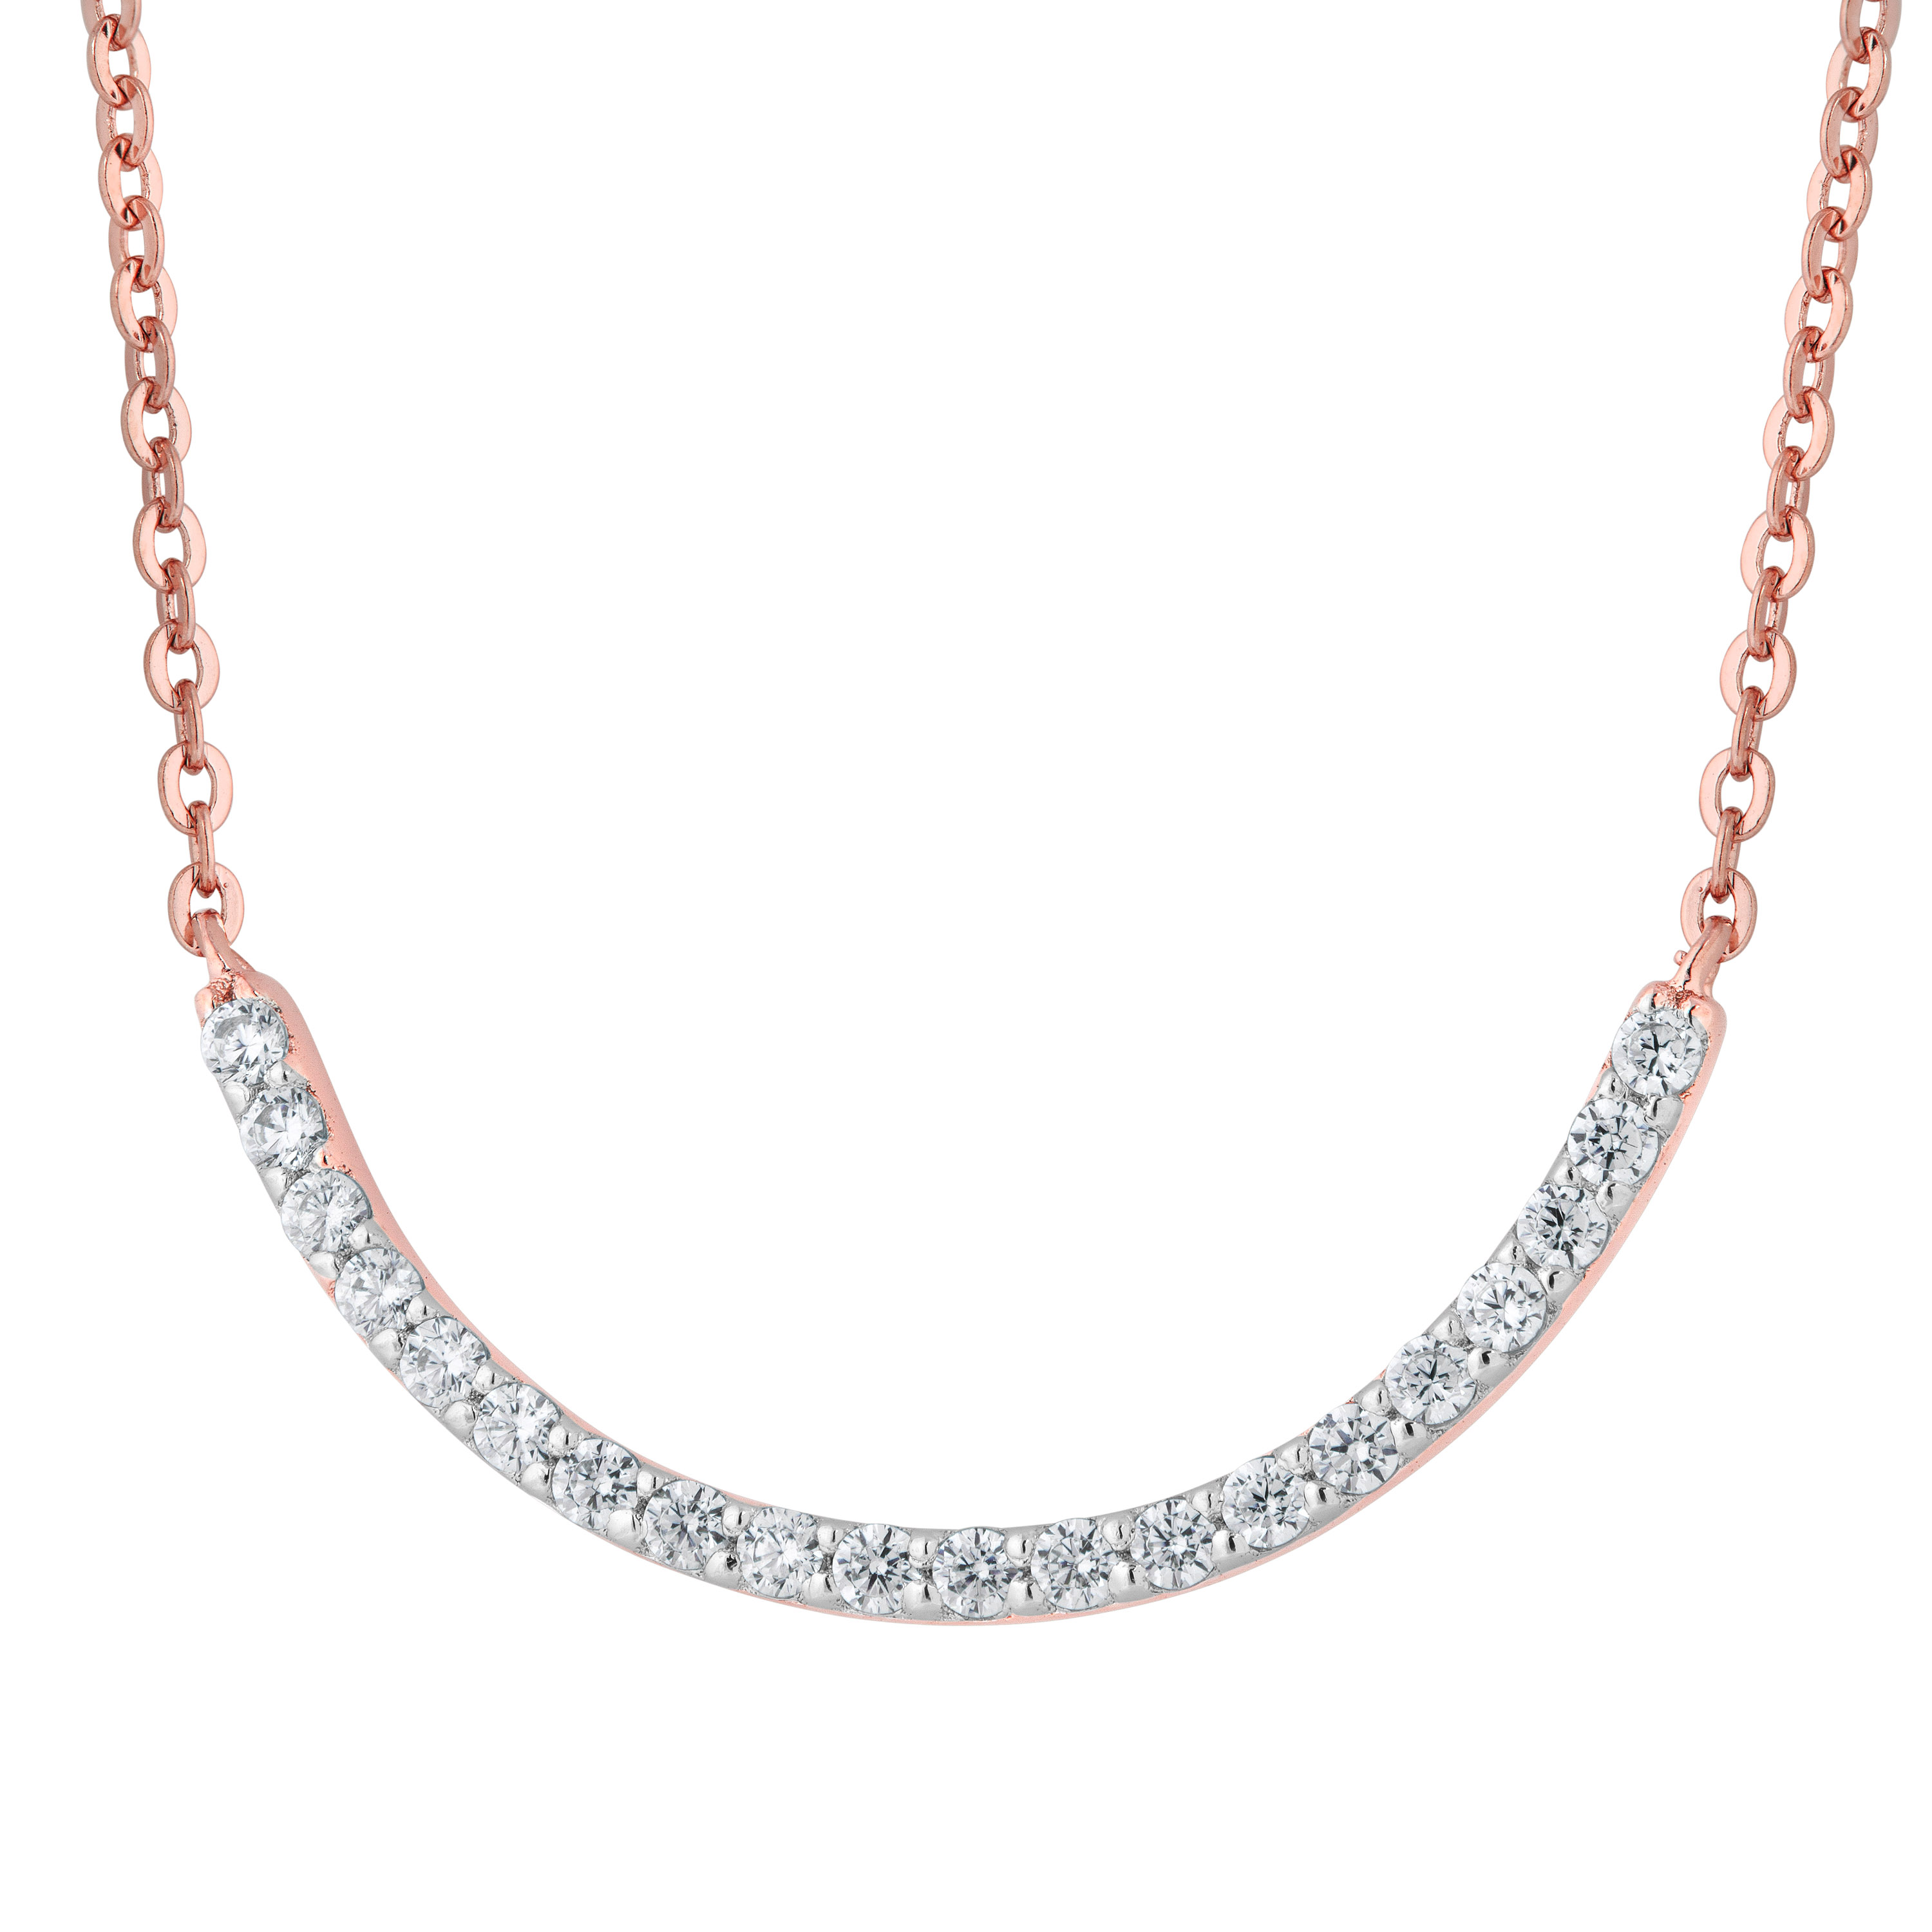 CZ Pendant Necklace, Rhodium Plated Sterling Silver